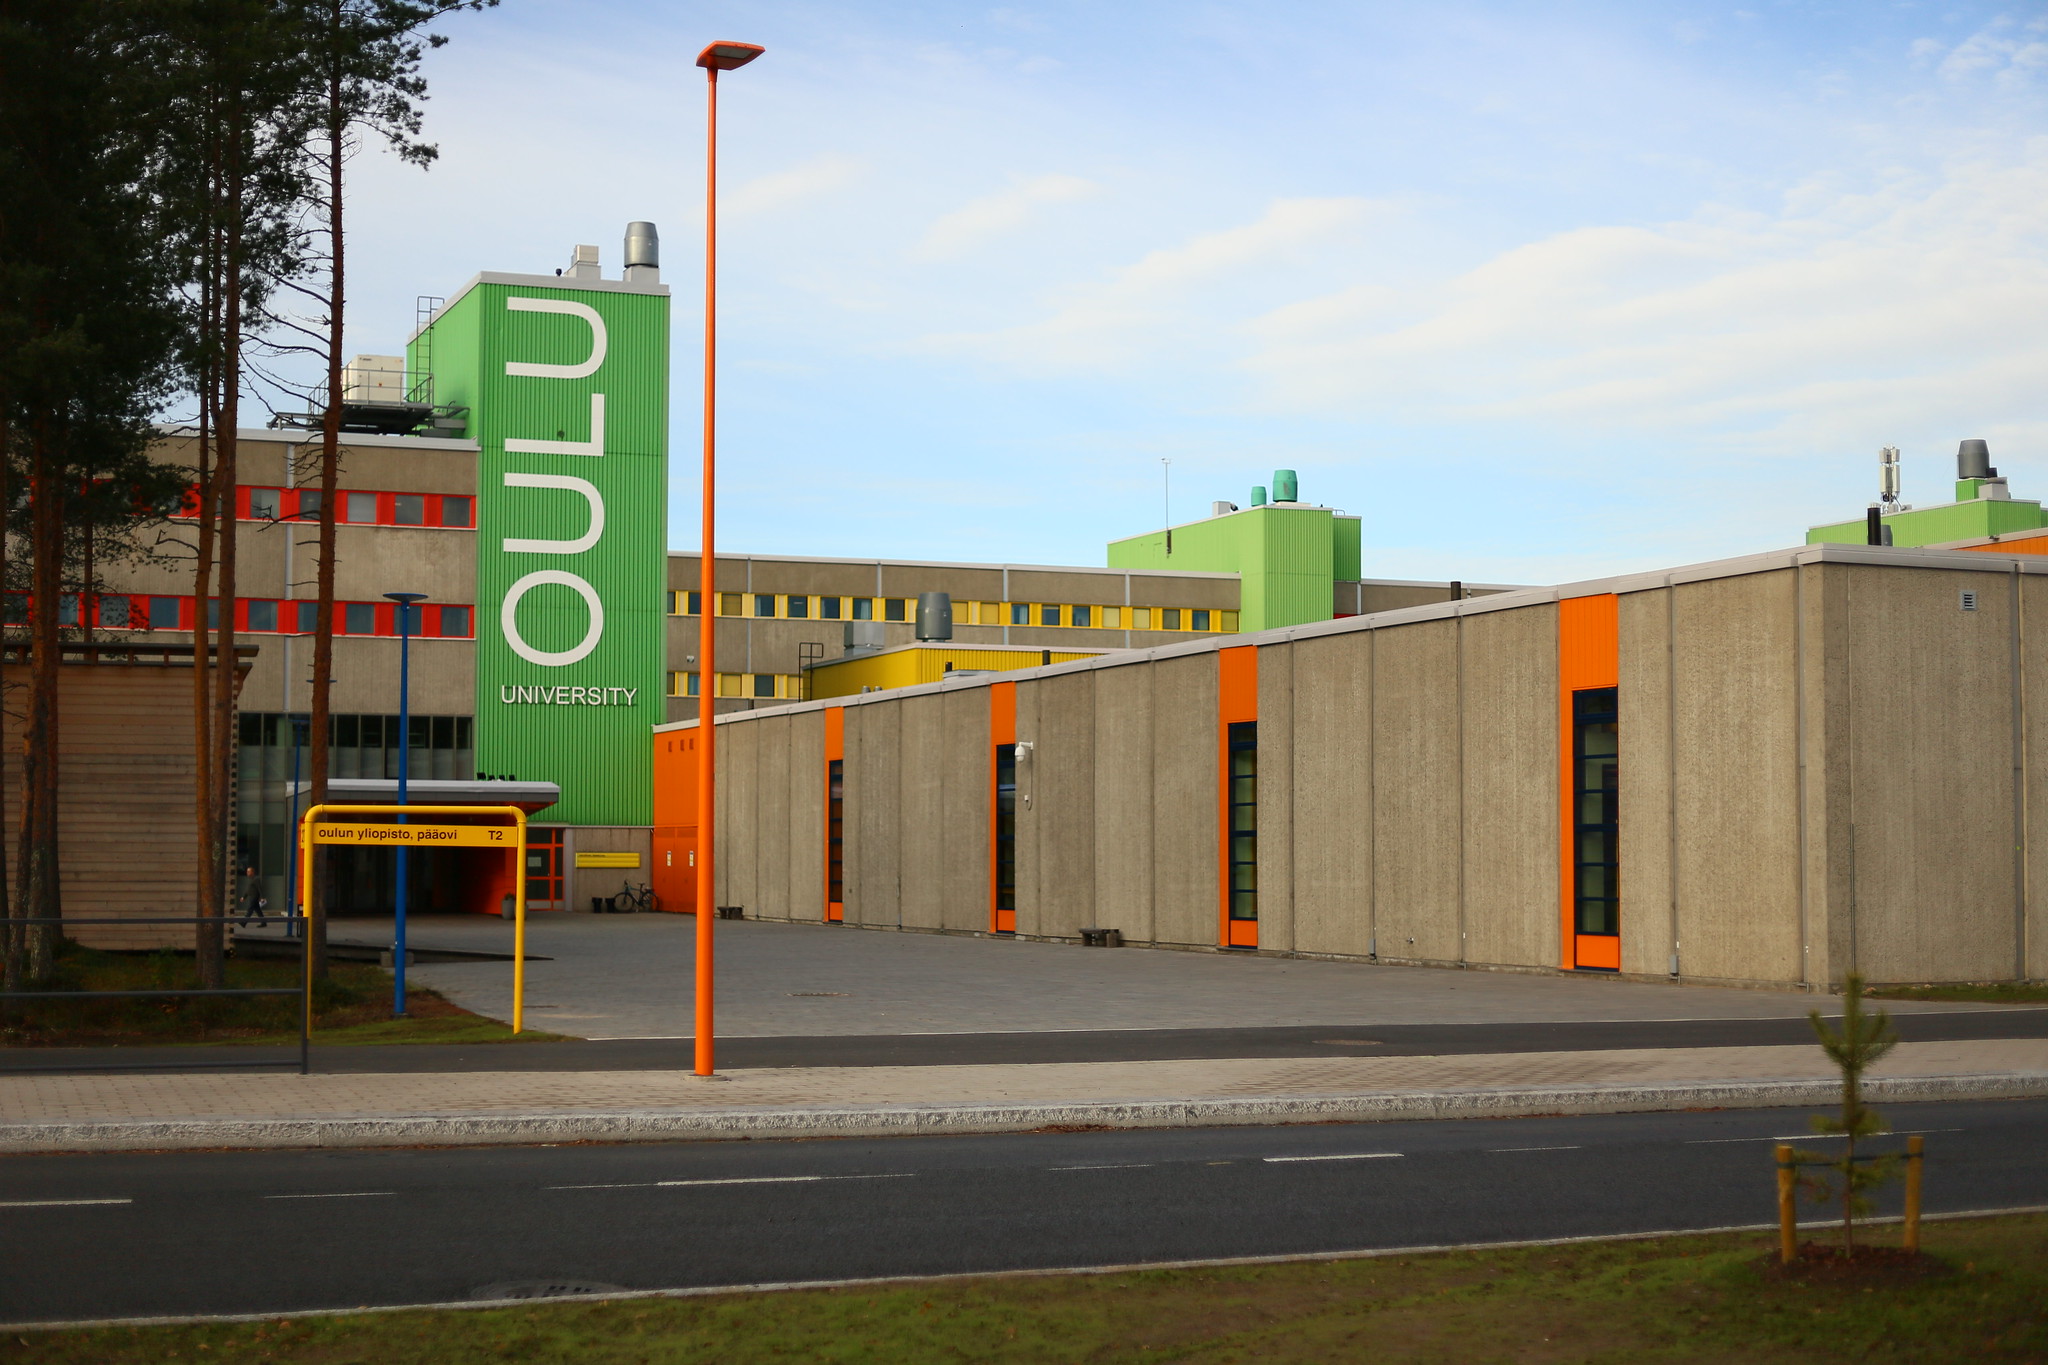 University of Oulu, home to 6G Flagship